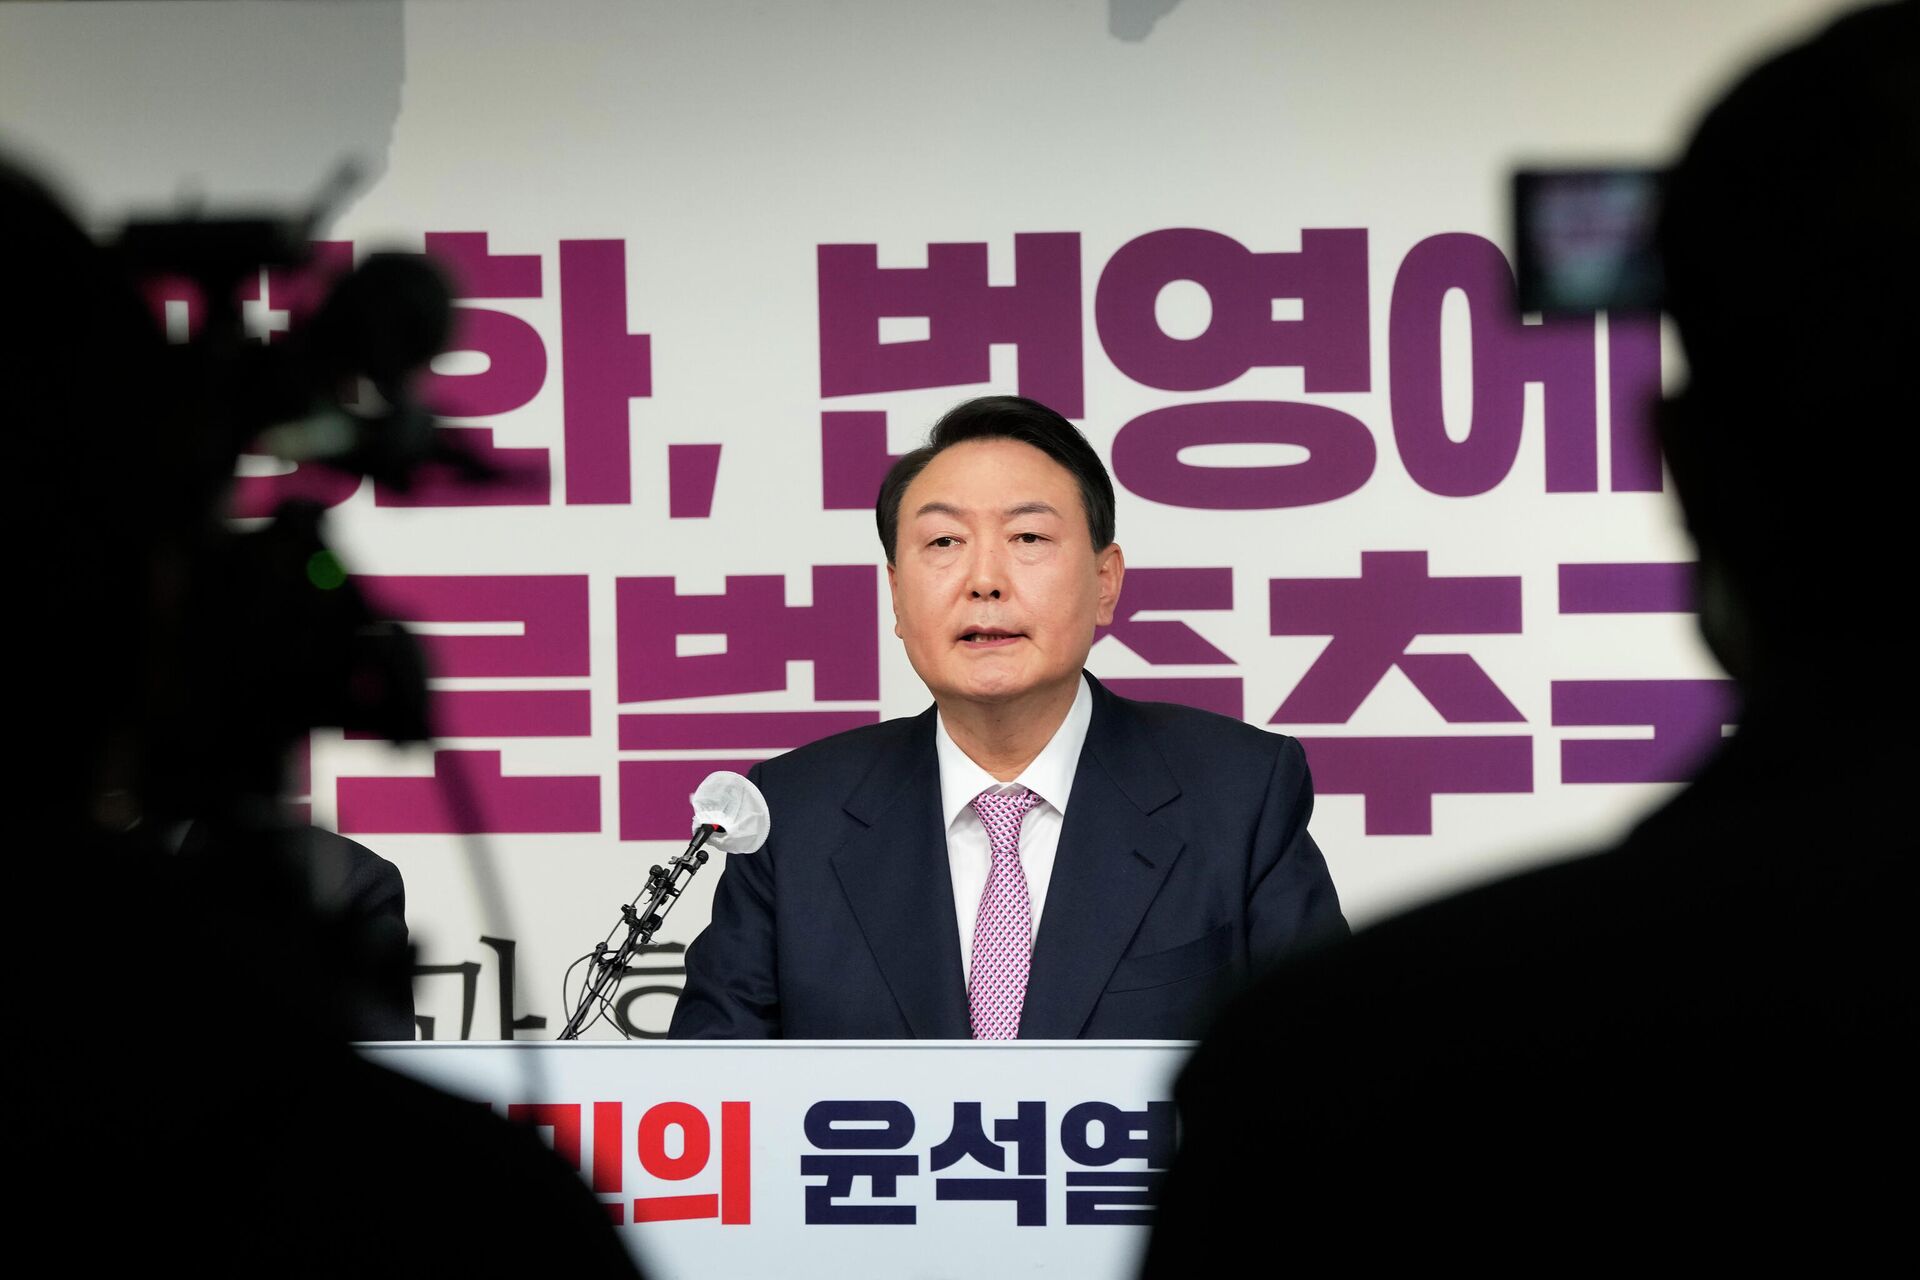 Yoon Suk Yeol, the presidential candidate of the main opposition People Power Party, speaks during a press conference at the party's headquarters in Seoul, South Korea Monday, Jan. 24, 2022. - Sputnik International, 1920, 23.08.2022